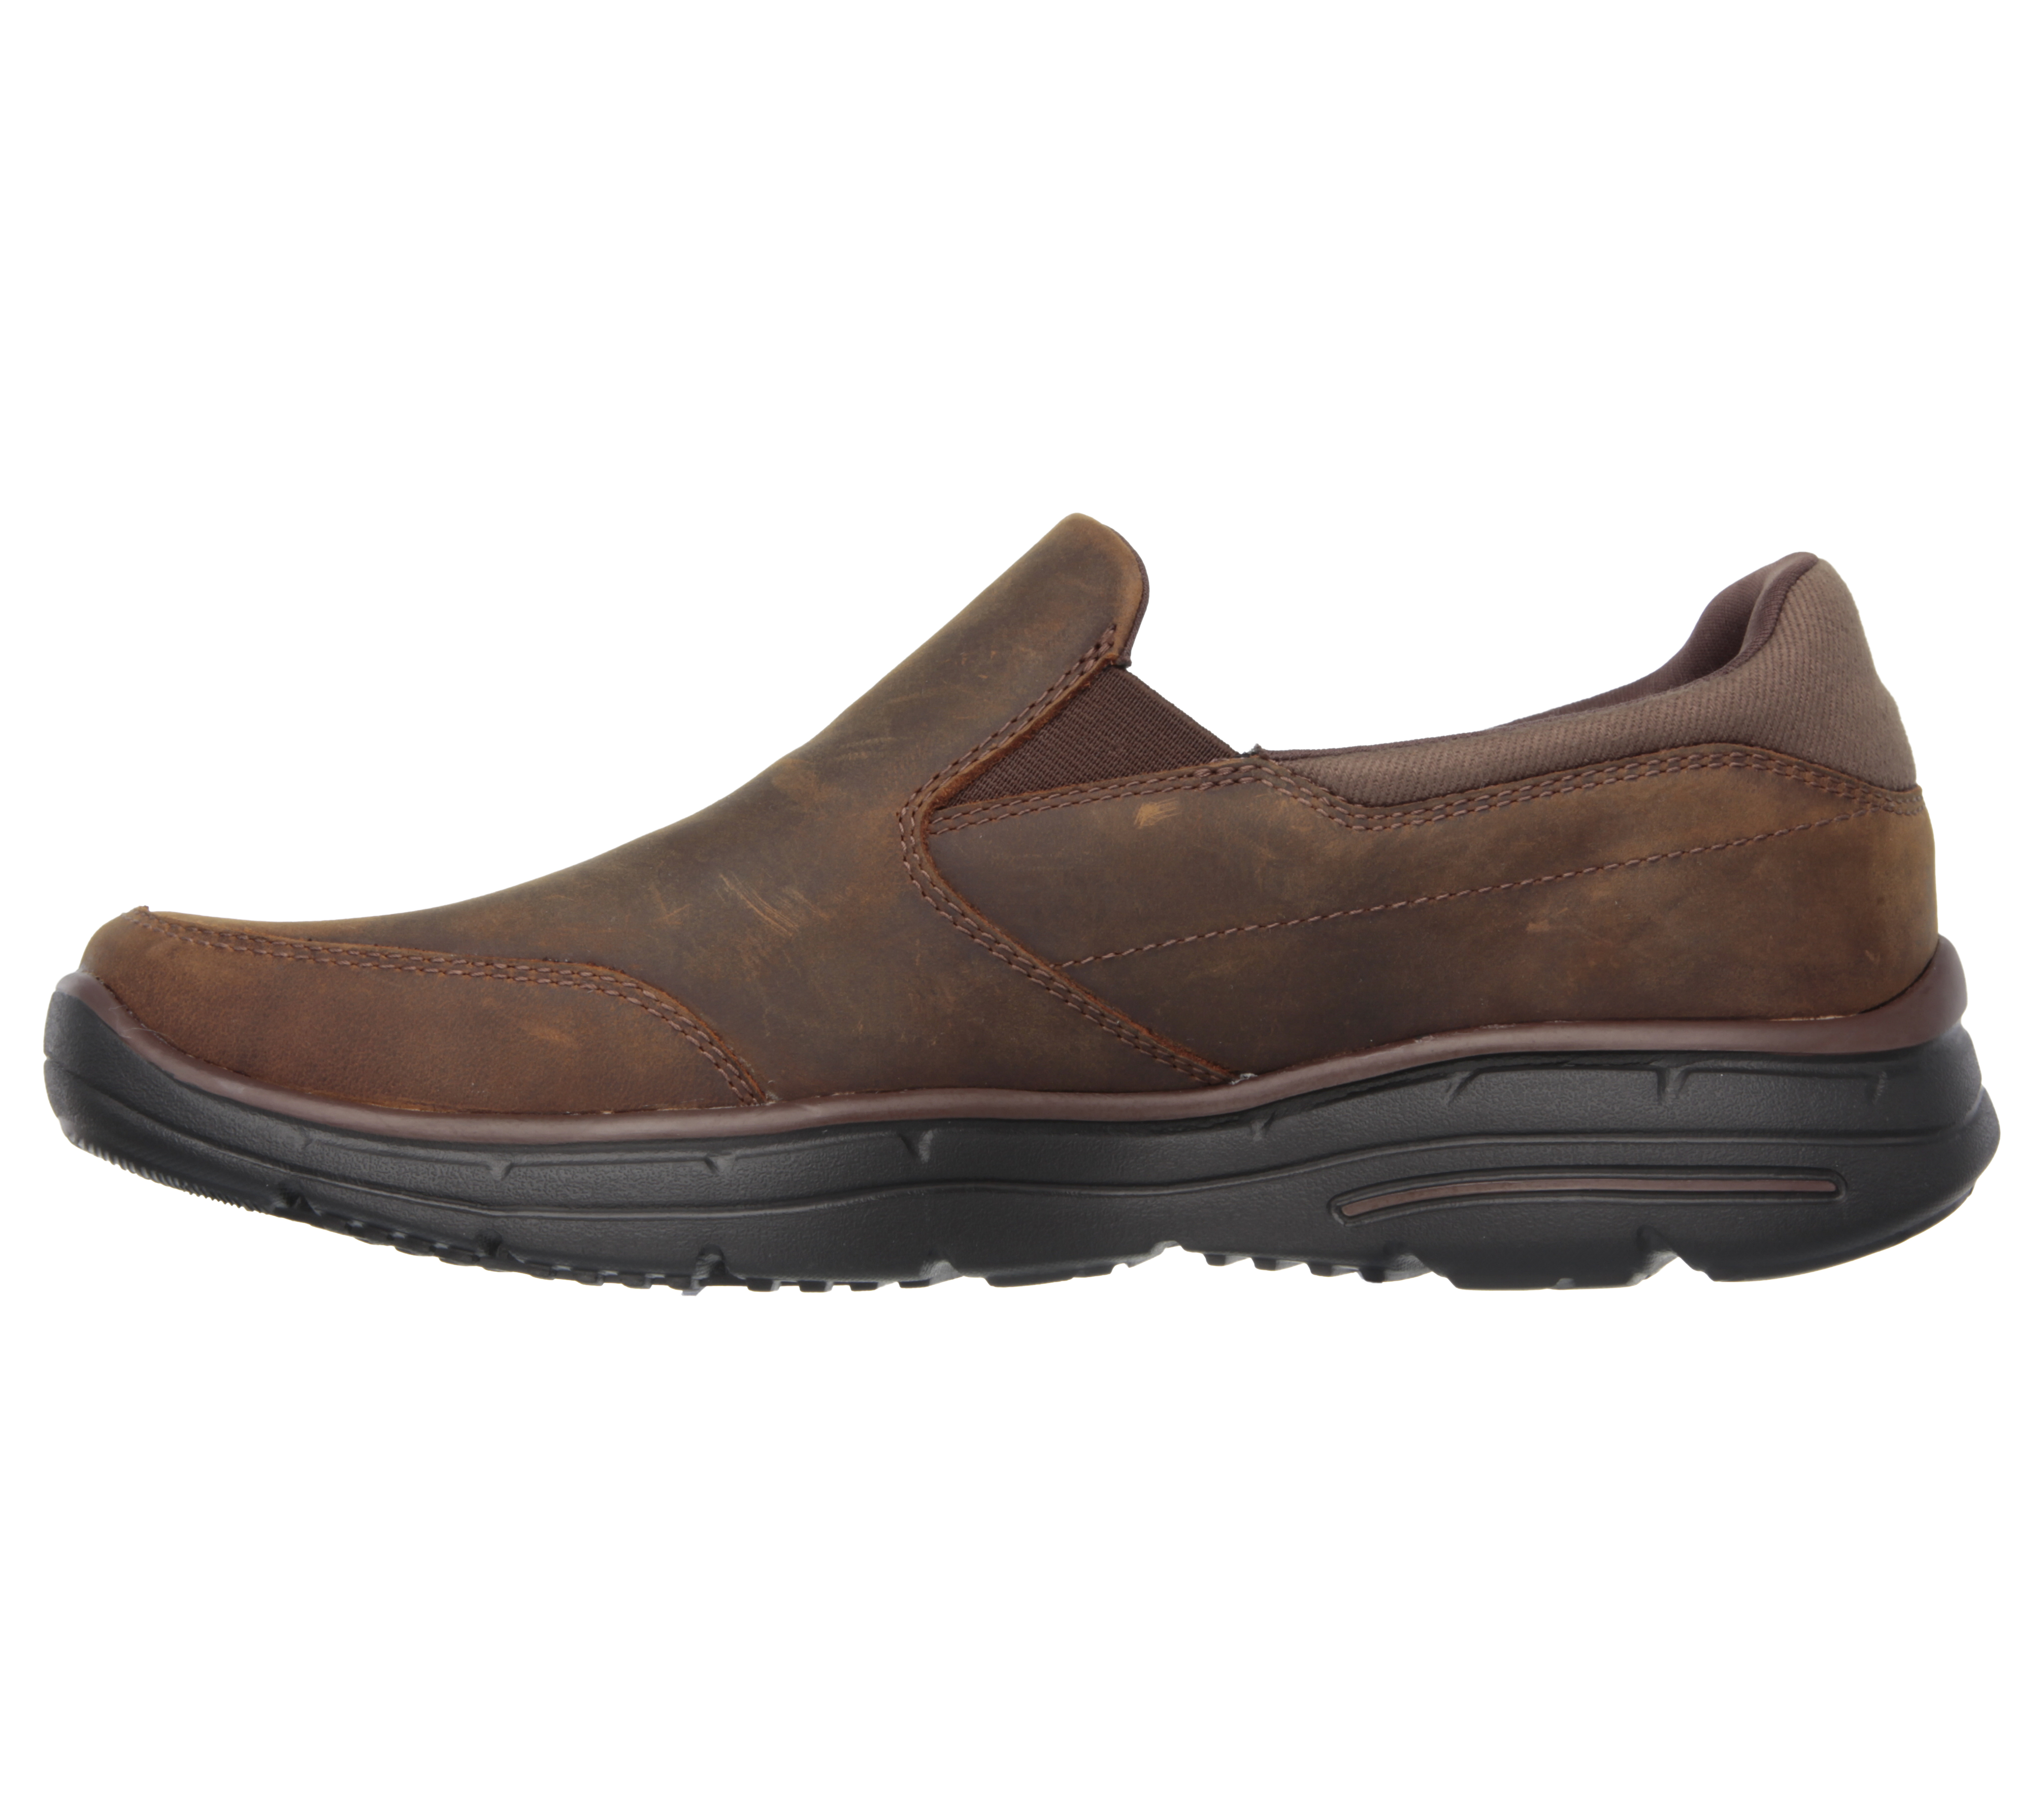 skechers relaxed fit glides status men's casual shoes